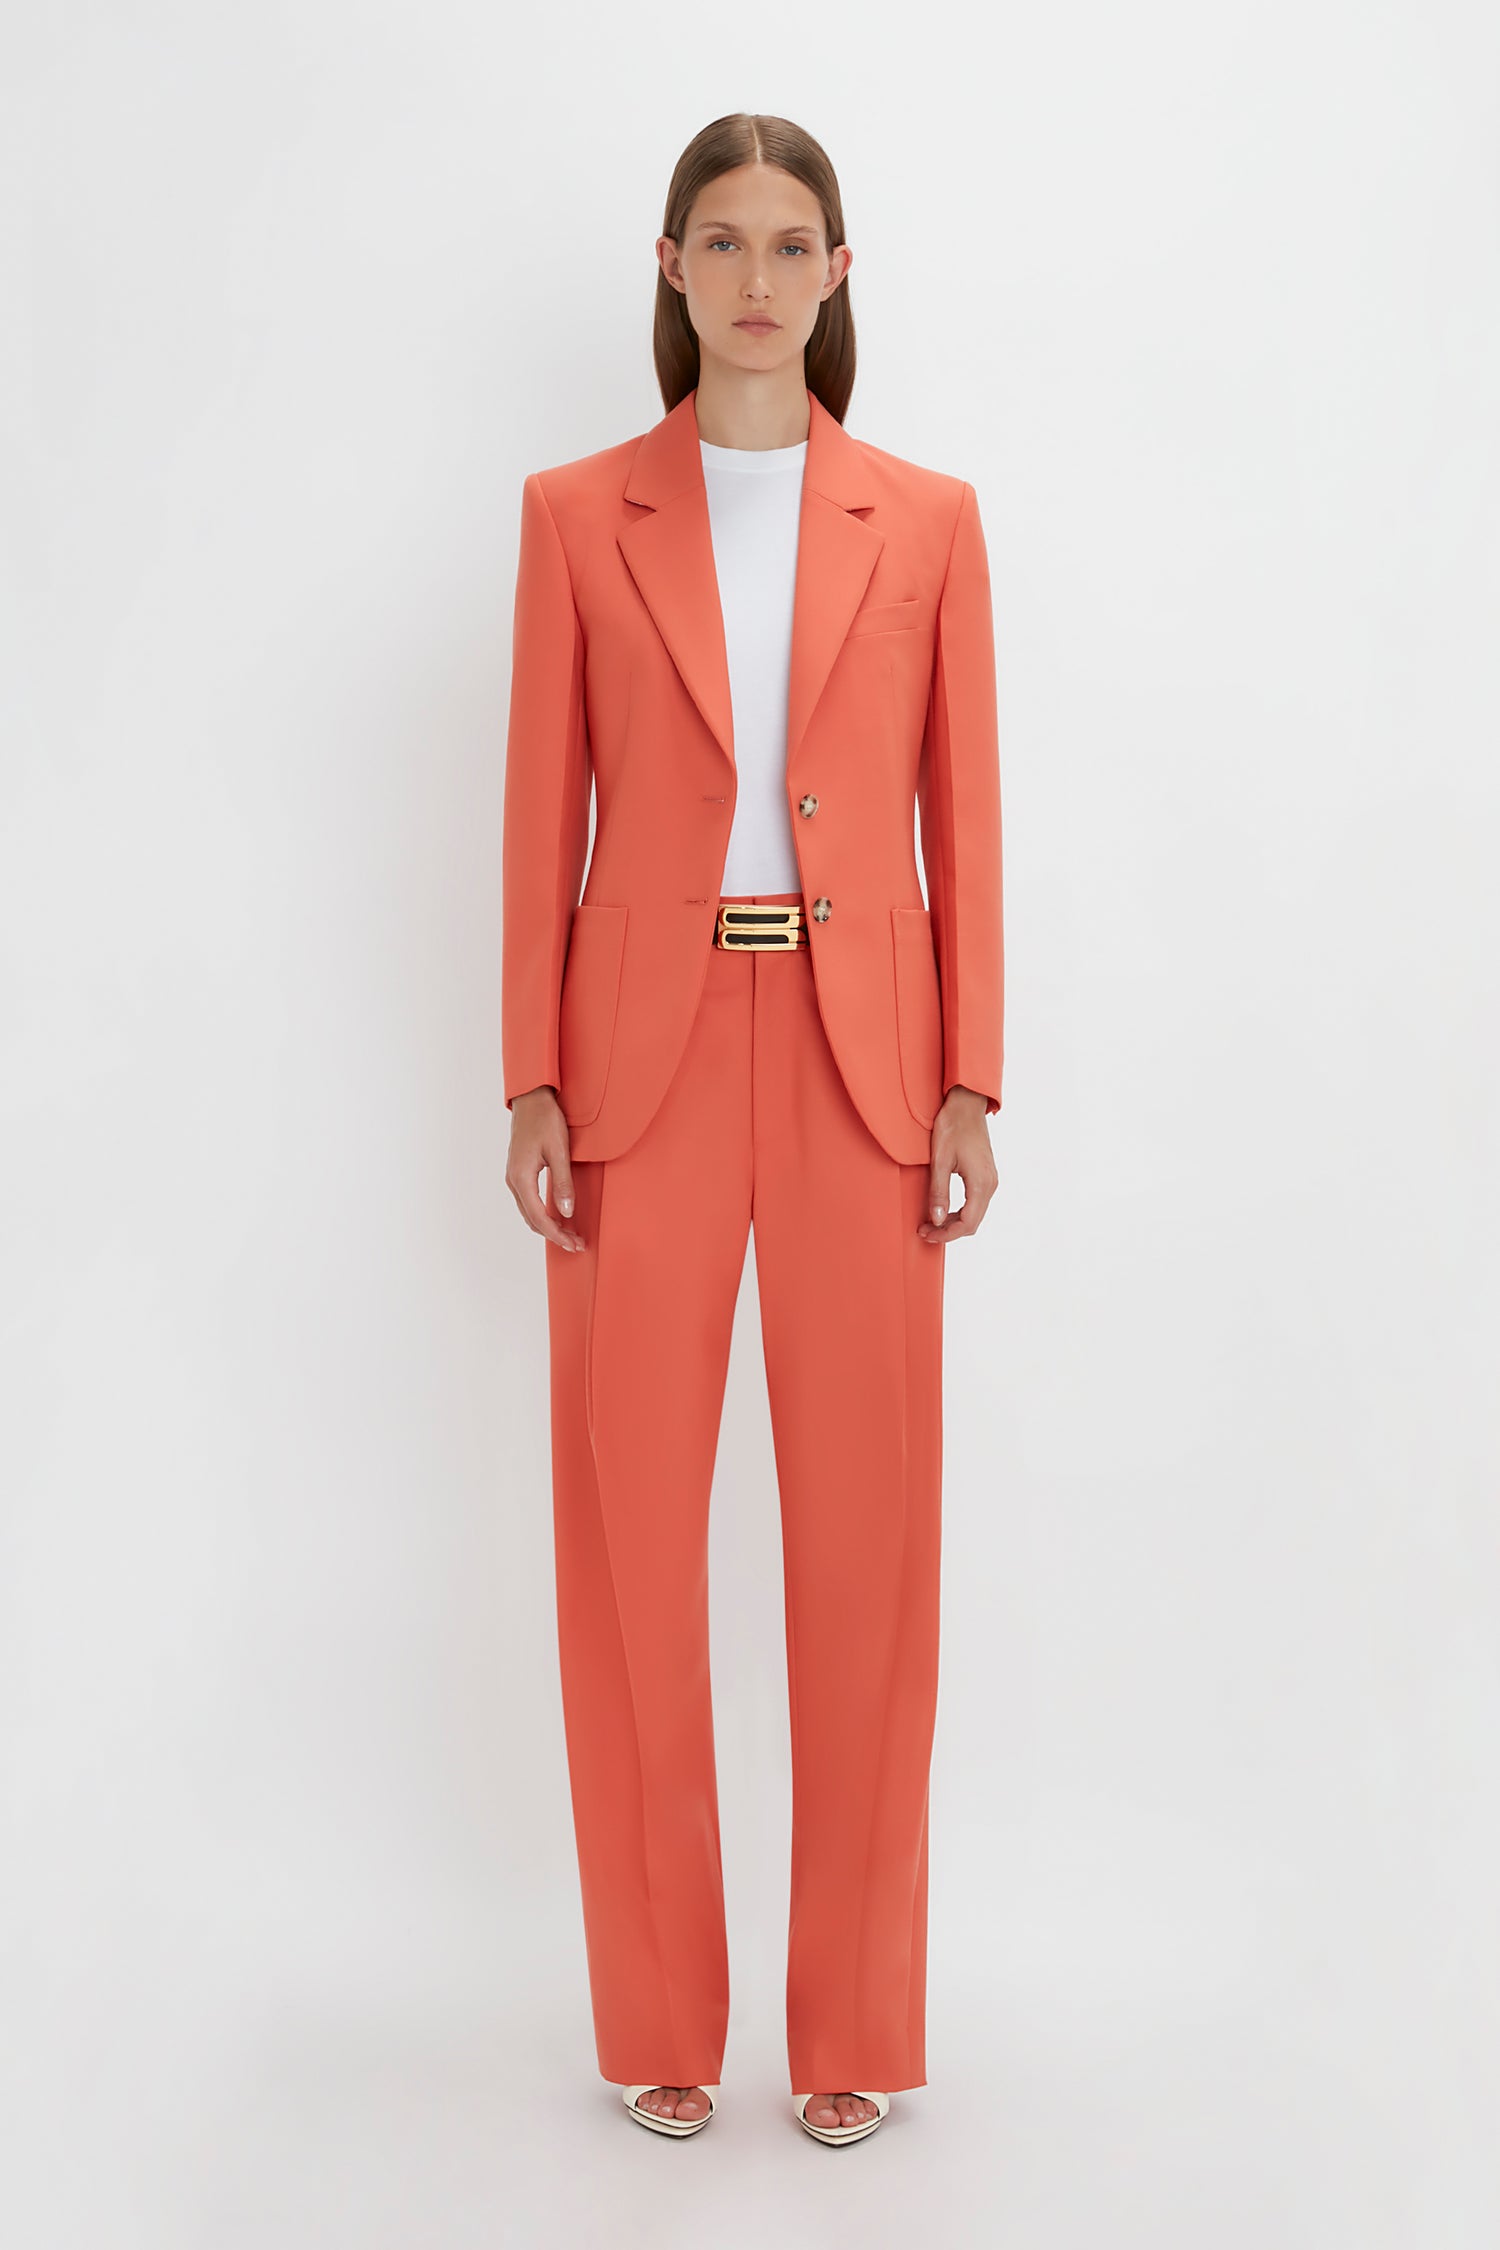 A woman in a Victoria Beckham Patch Pocket Jacket In Papaya with straight-leg trousers and a matching blazer, accessorized with a black belt, stands against a white background.